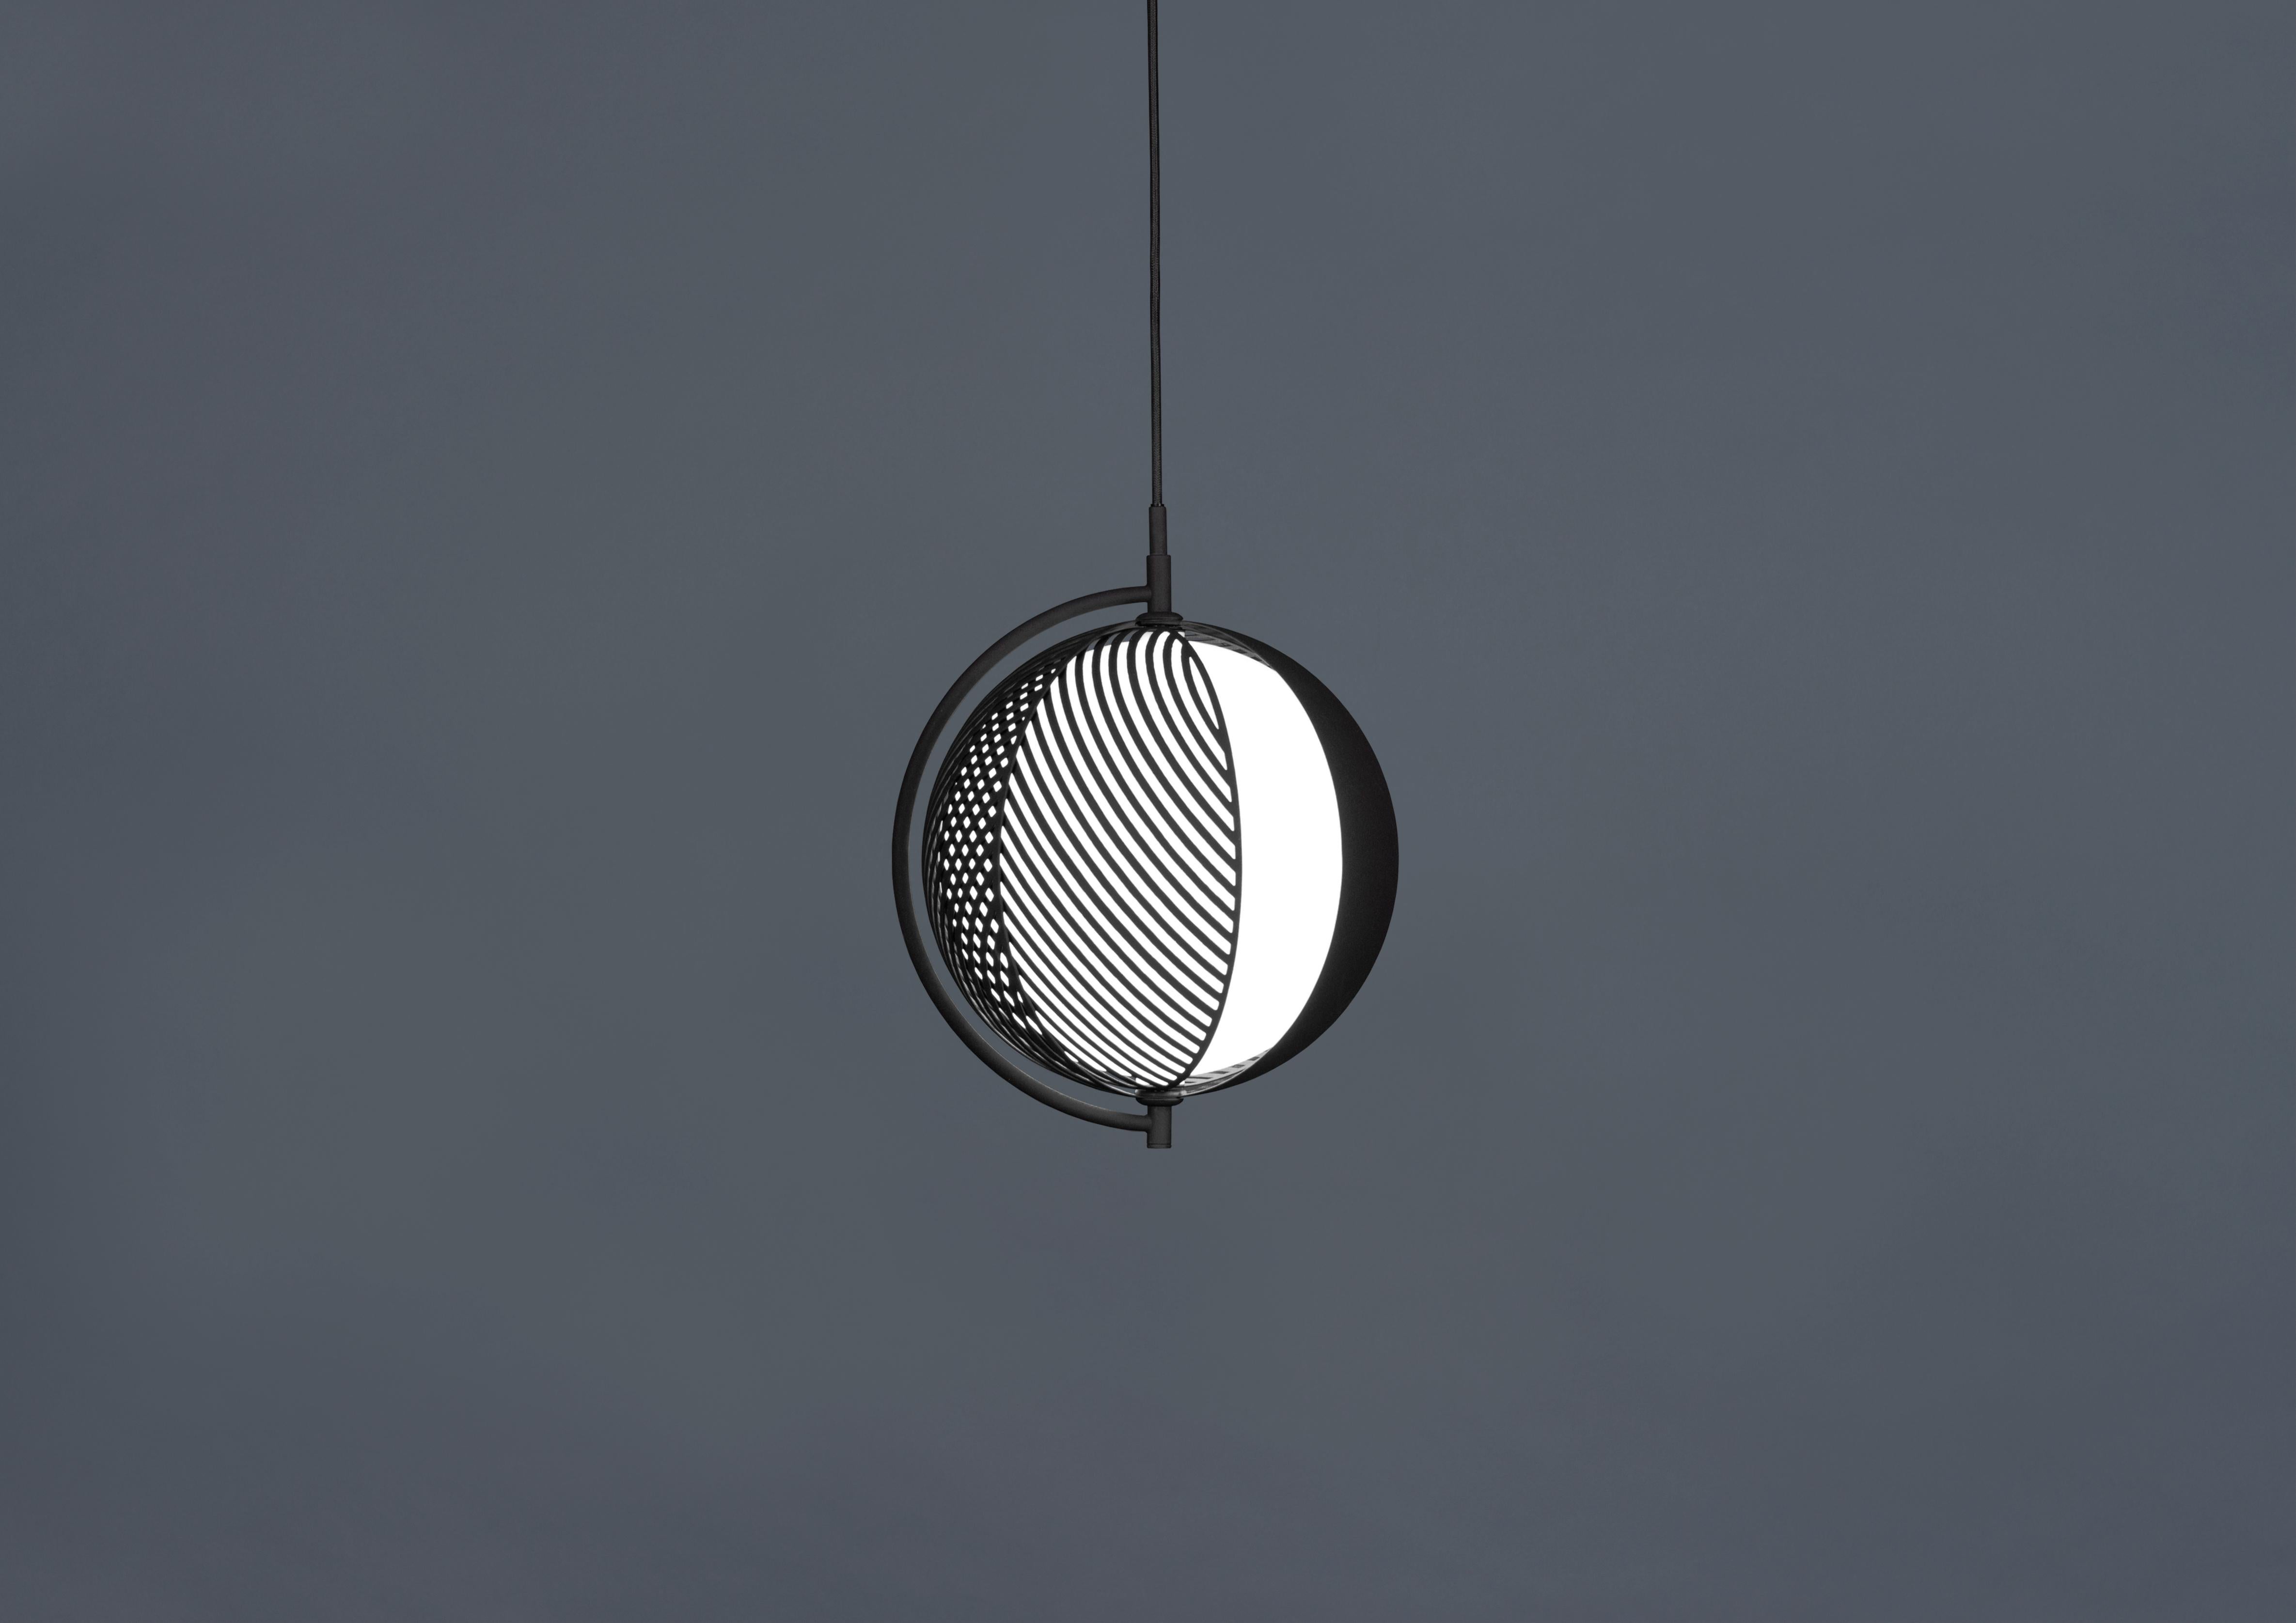 Mondo pendant lamp by Antonio Facco 
Dimensions: 36.5 x 28 cm (Ø)
Floor lamp with movable metal shades with pattern.
Mondo consist of four metal shades, mounted in pairs, overlapping each other which allow the beholder to interact with the lamp.